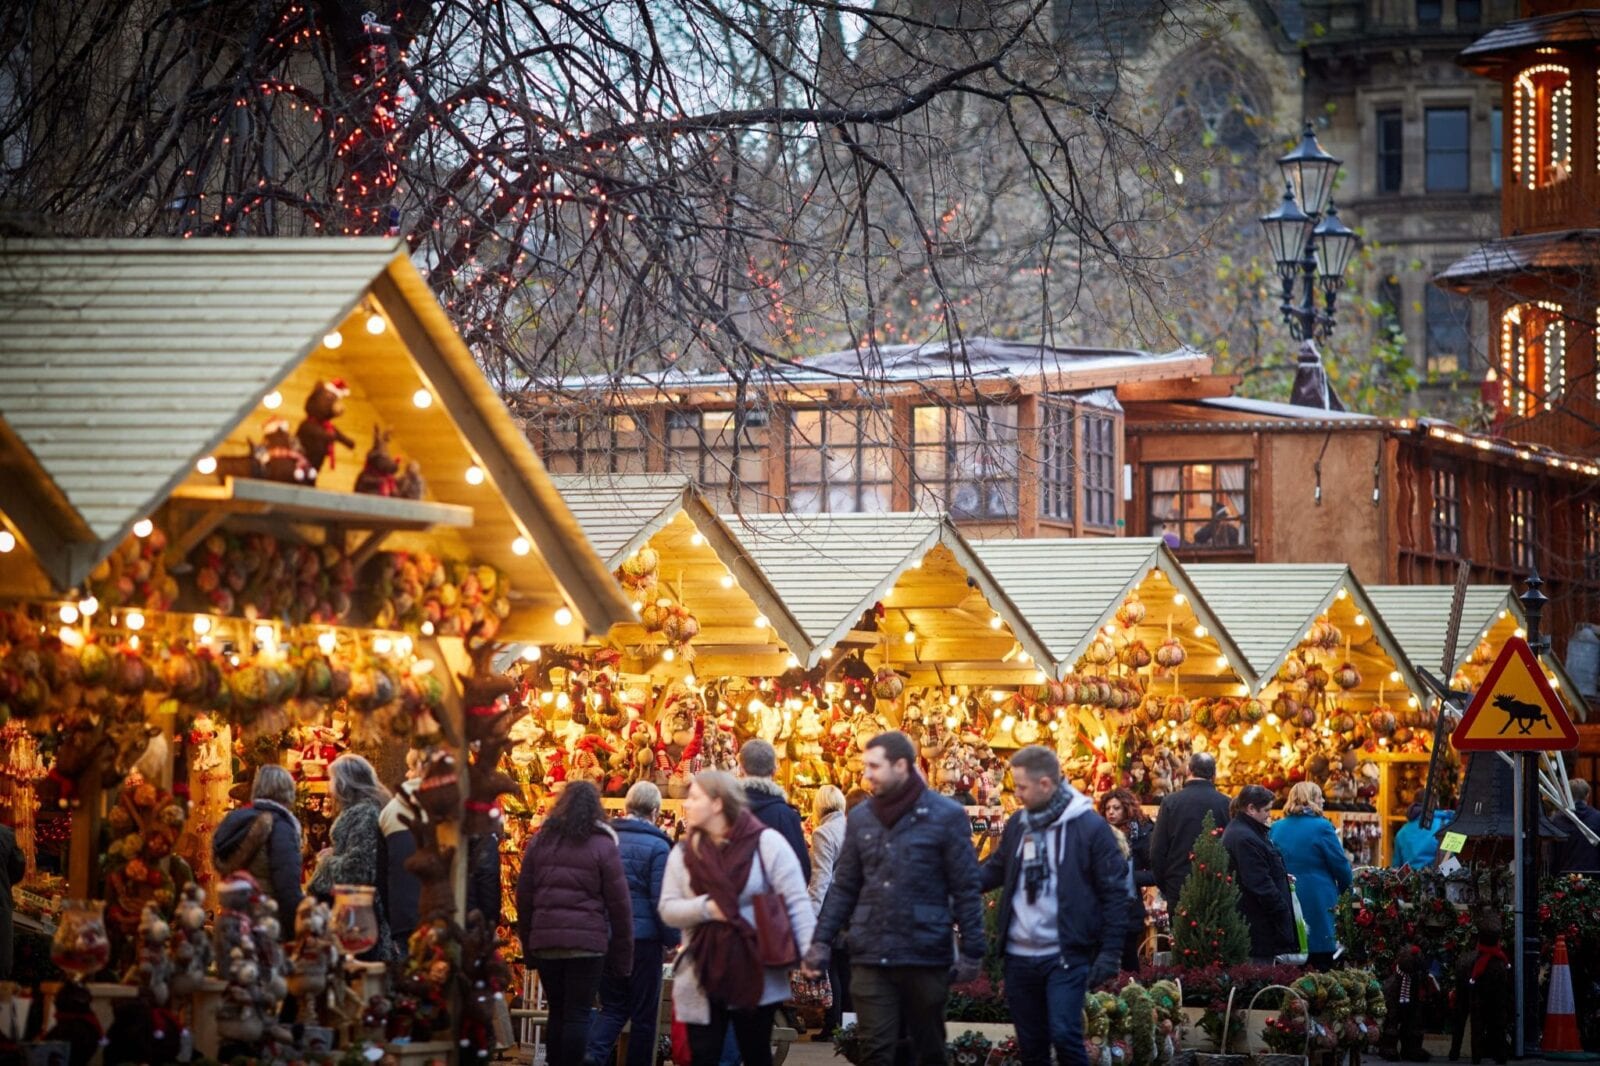 Councillor Pat Karney dishes more on how Manchester Christmas Markets will safely go ahead this year, The Manc